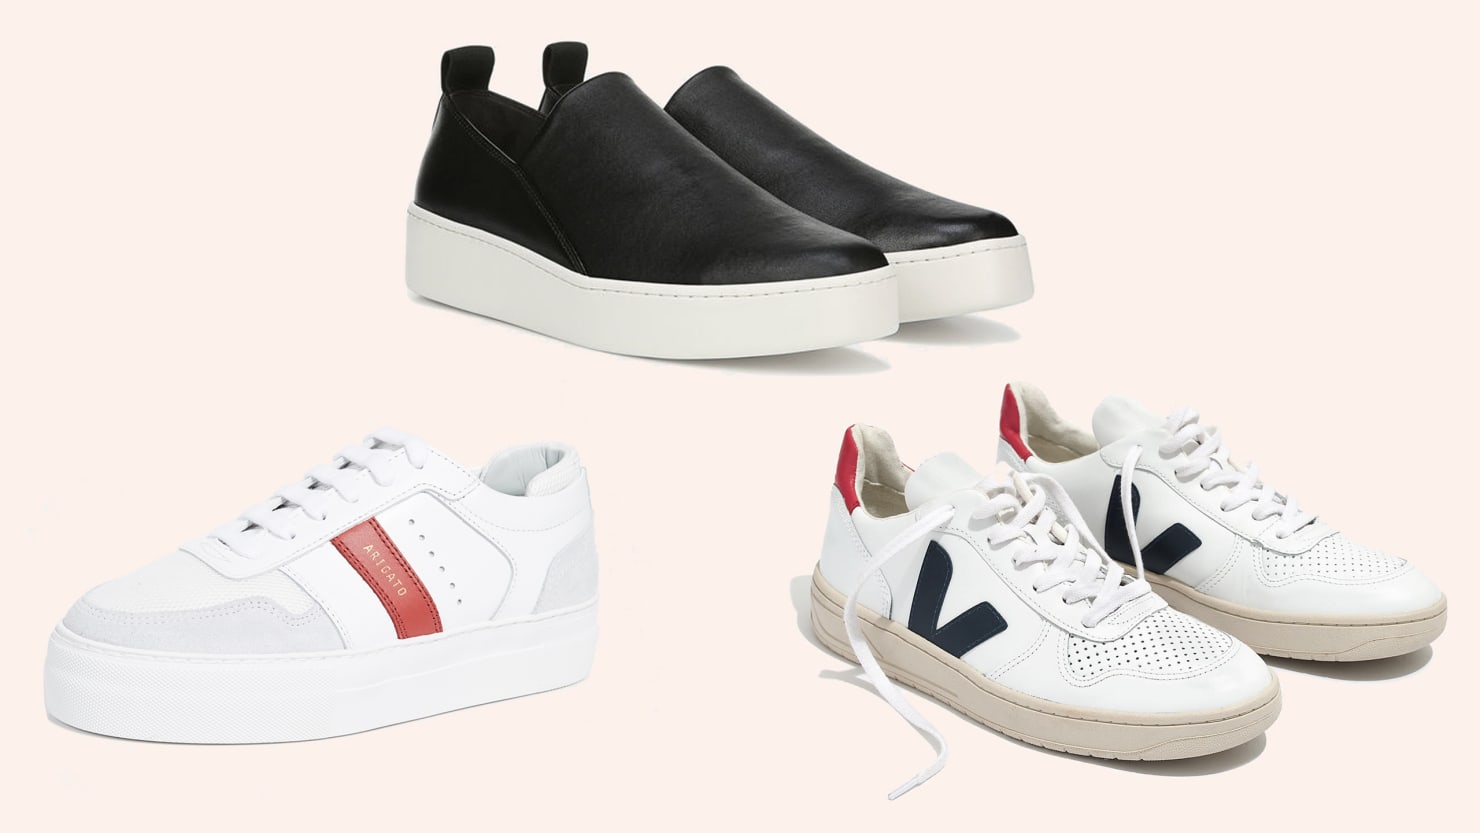 The Nicest Women’s Sneakers for Everyday Wear